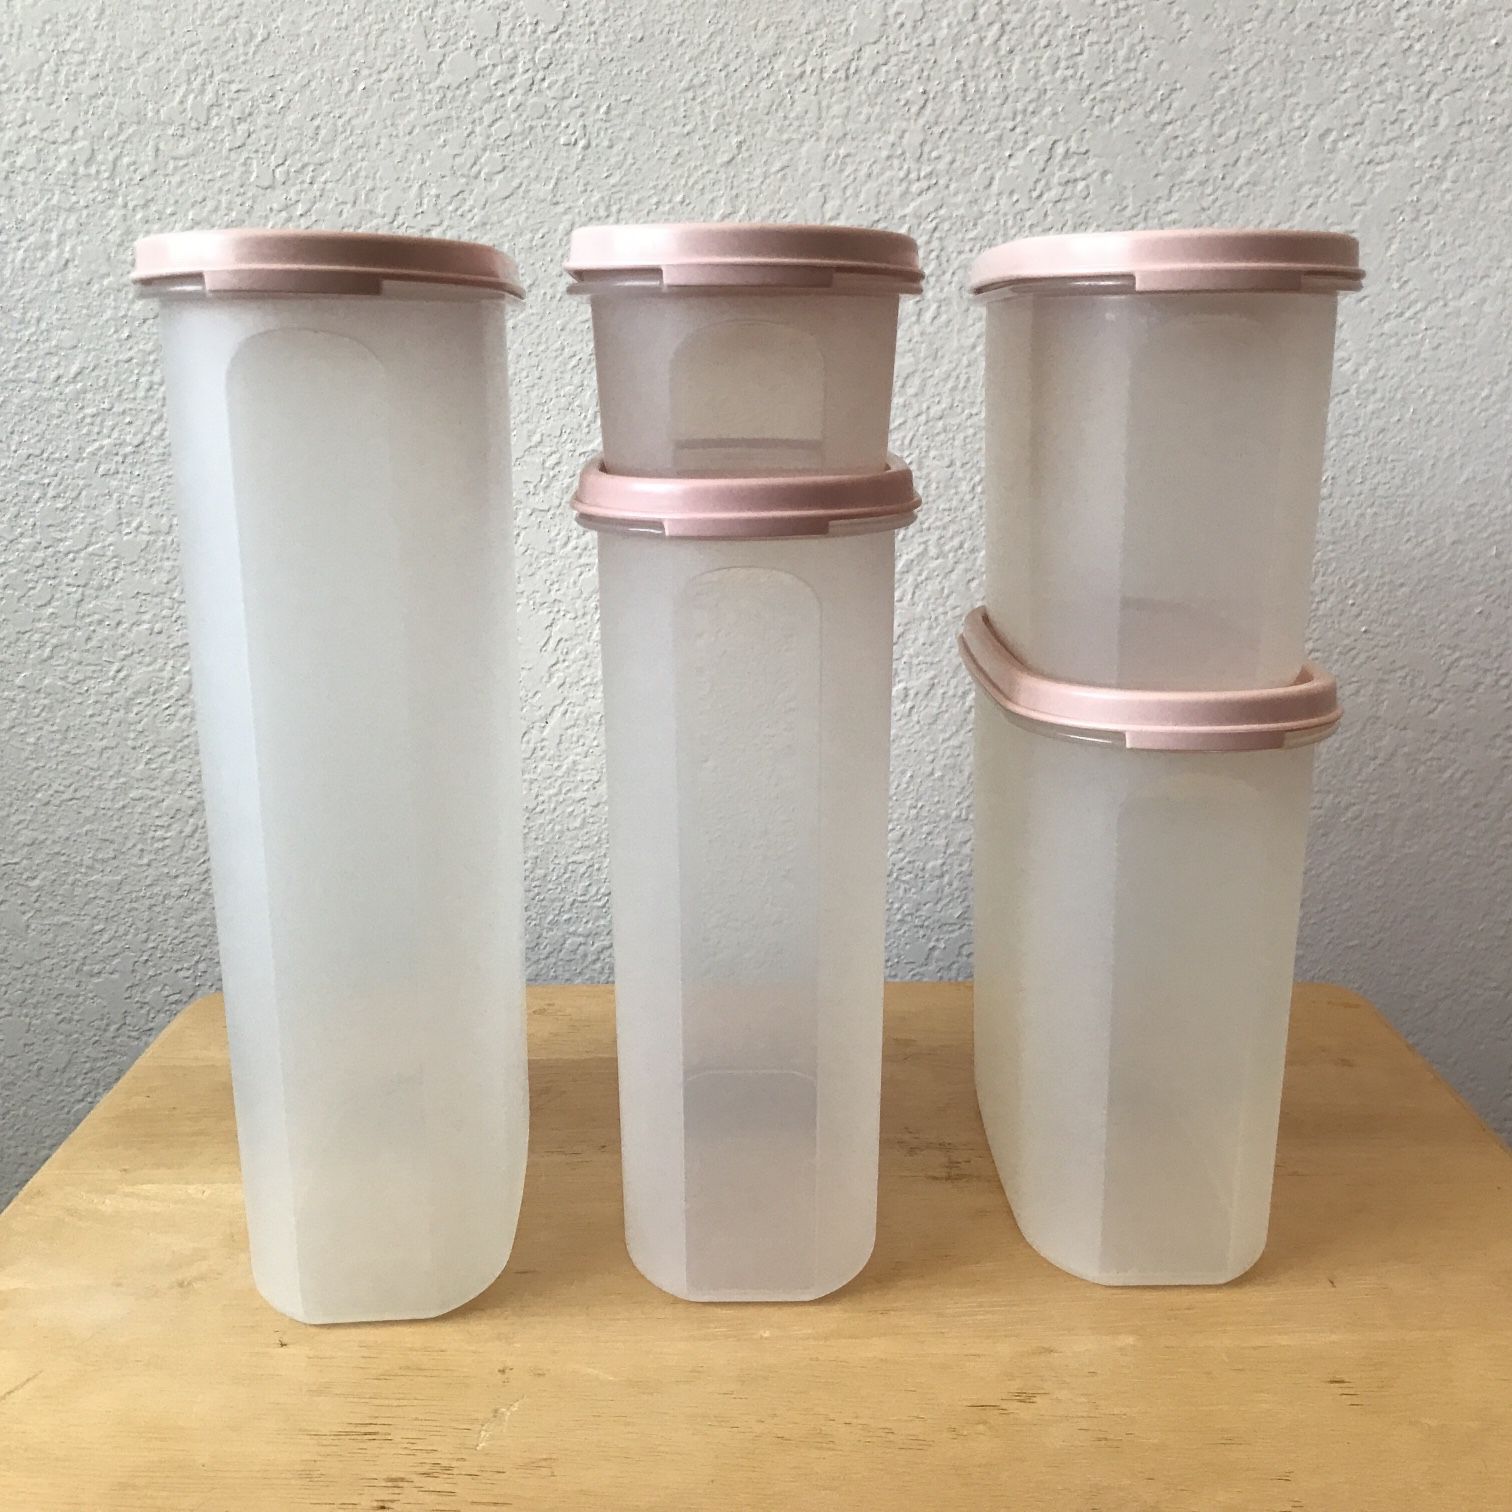 Tupperware Modular Mates Spice Shakers Set of 3 with Pink Lids